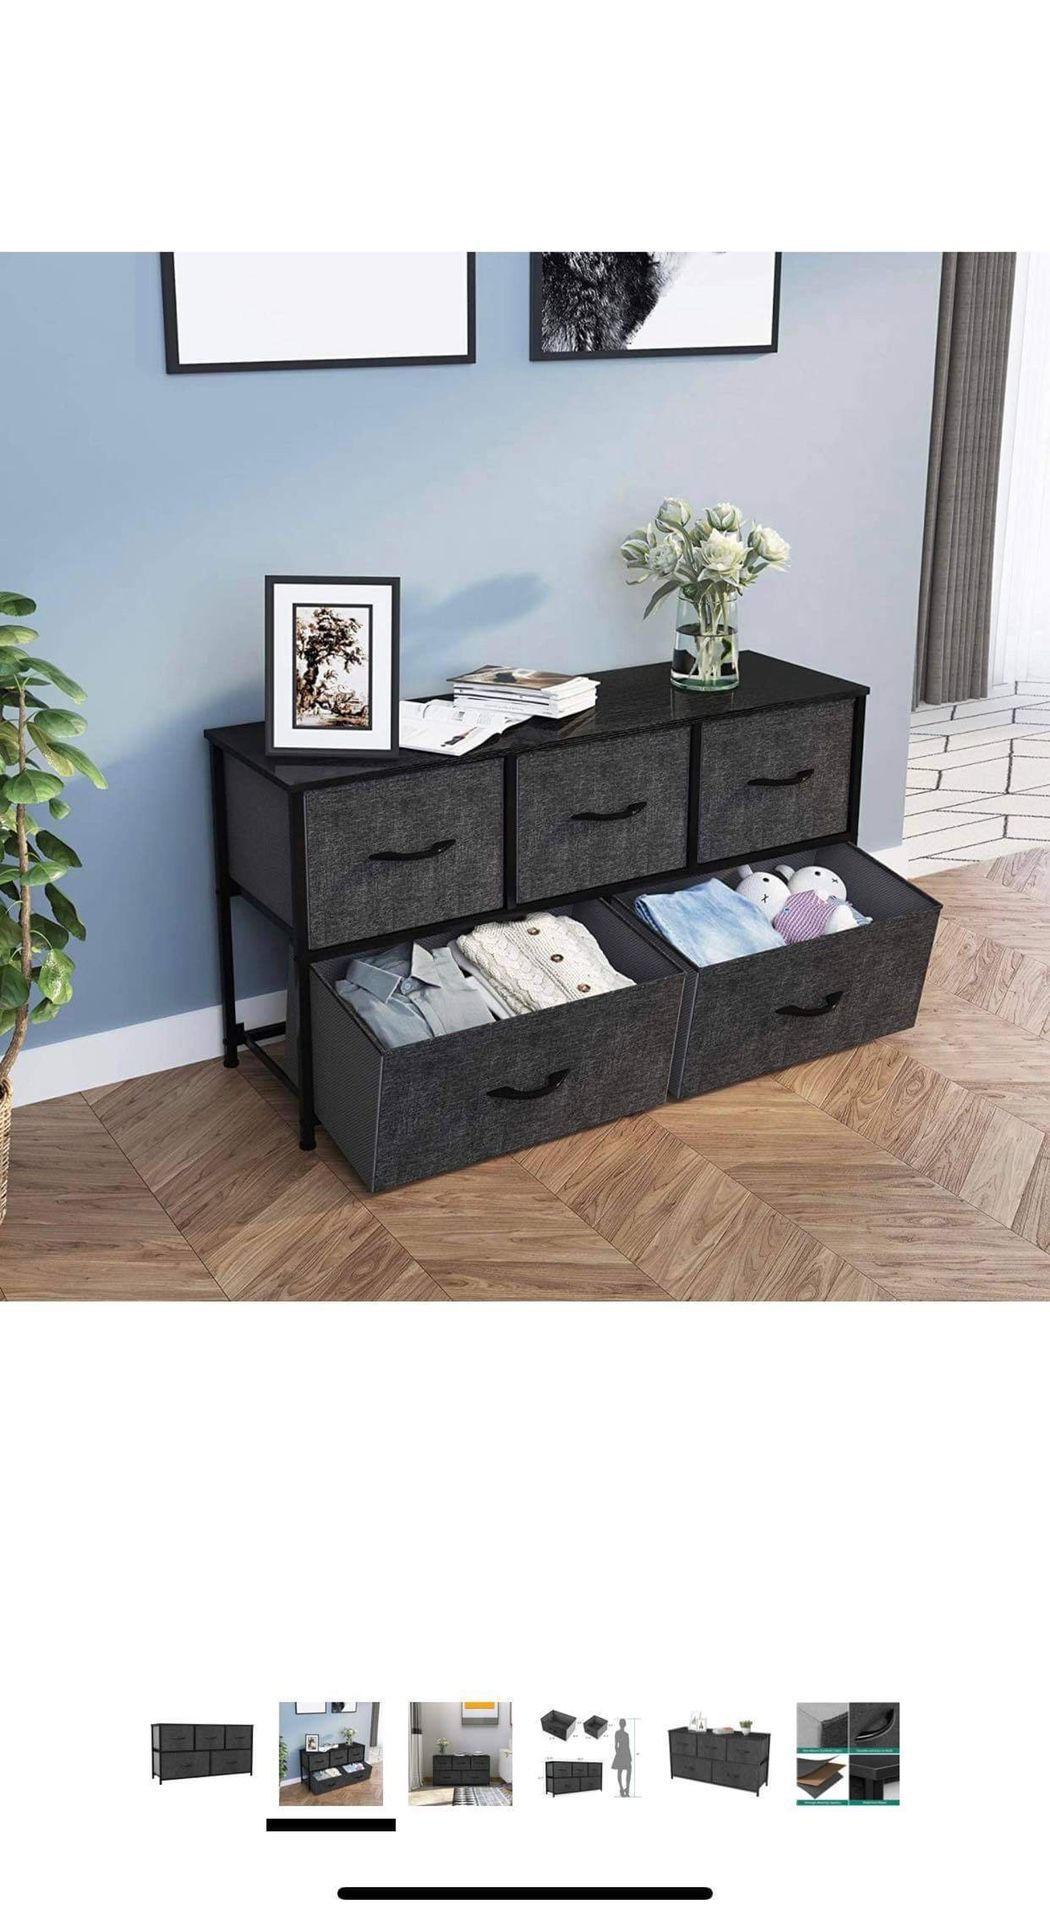 Wide Storage Tower with 5 Drawers - Fabric Dresser, Organizer Unit for Bedroom, Living Room, Closets & Nursery - Sturdy Steel Frame, Easy Pull Fabric 